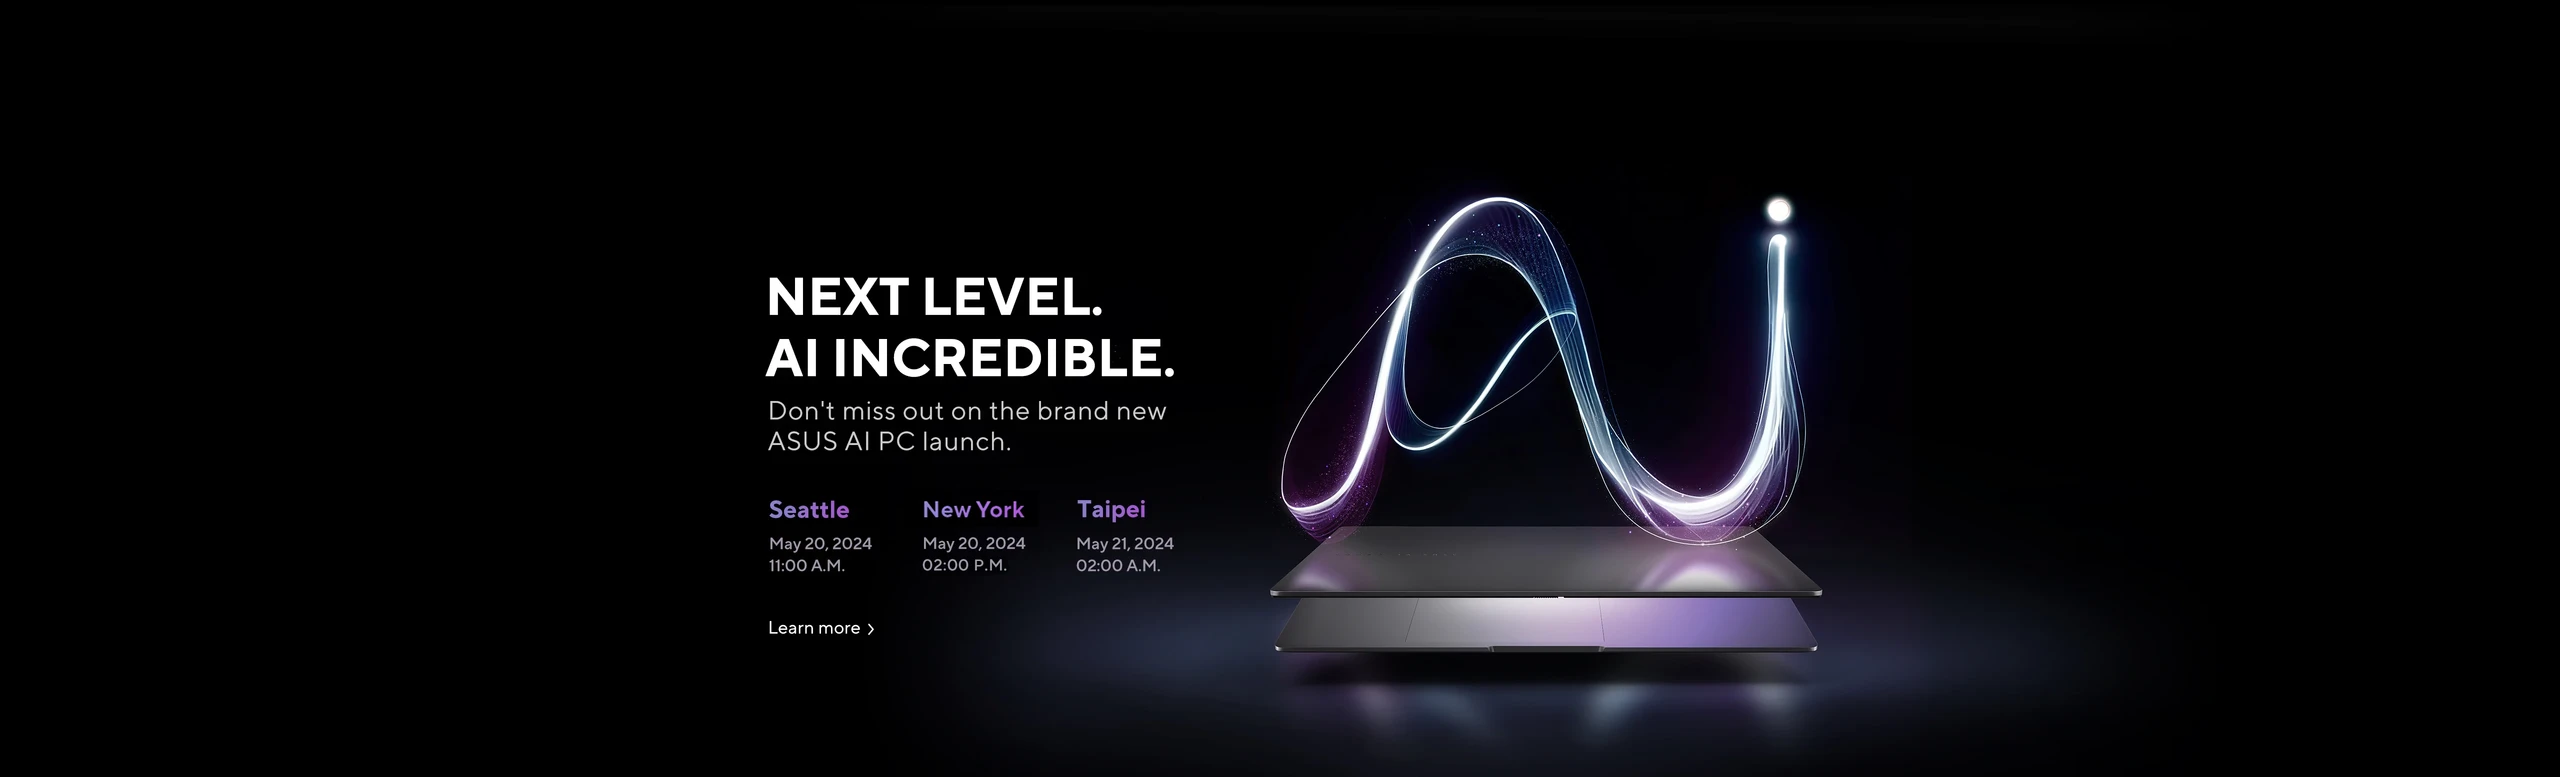 Next Level AI Incredible.  Don't miss out on the brand new ASUS AI PC launch.  Seattle  May 20, 2024 11:00 am.  Toronto, May 20, 2024, 2:00 pm, Taipei, May 21, 2024 2:00 am